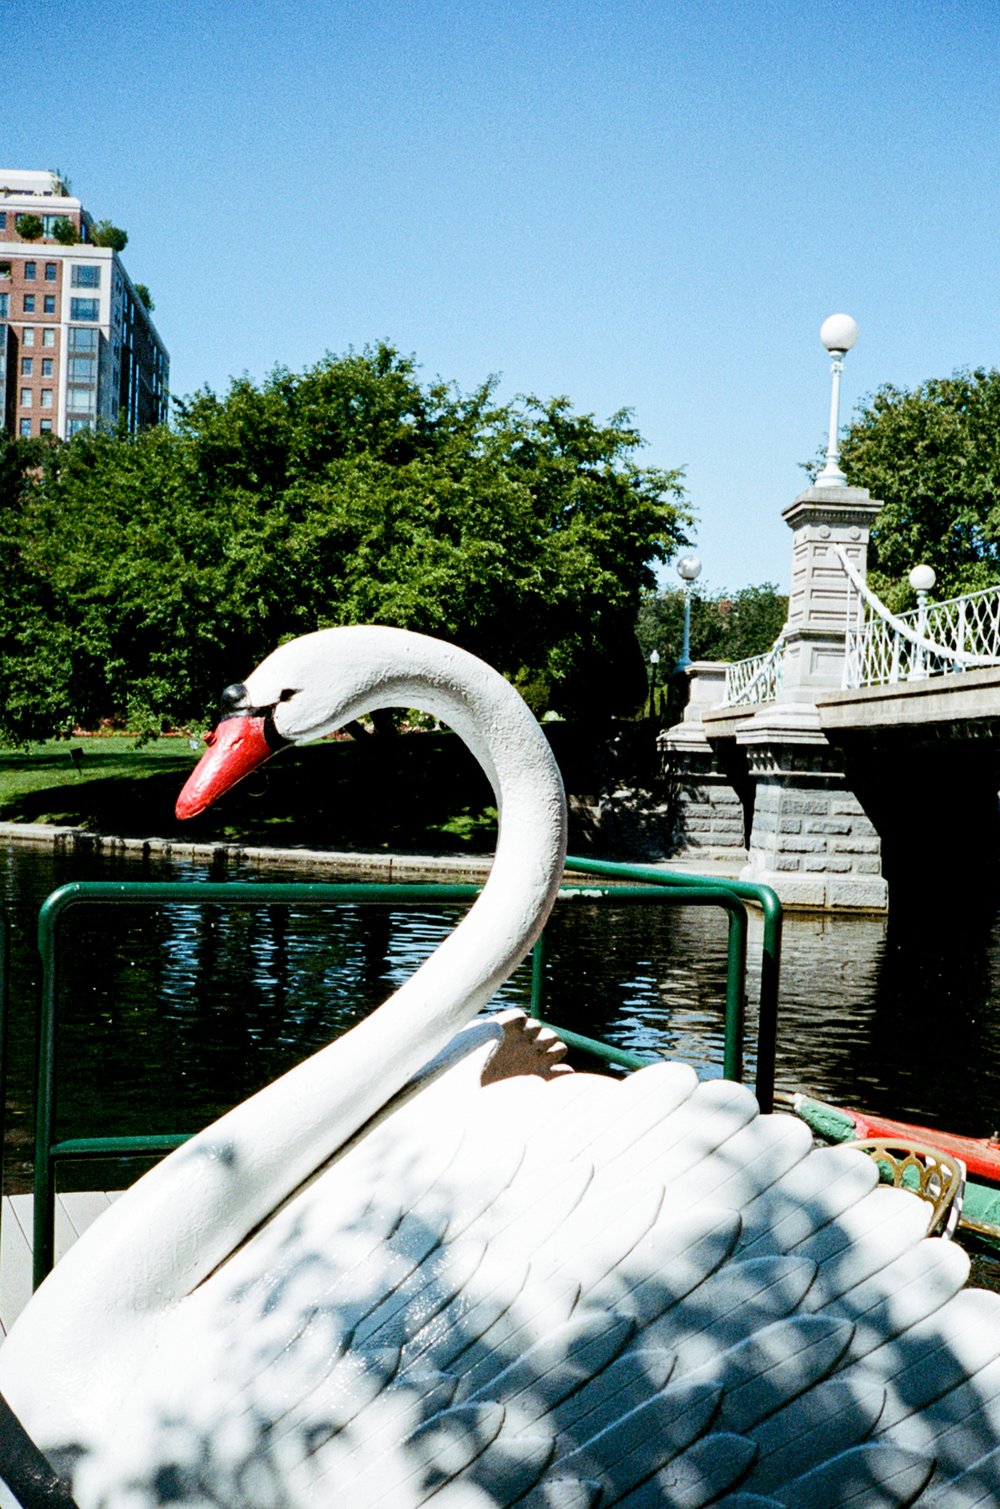 The iconic swan boats of Boston Commons